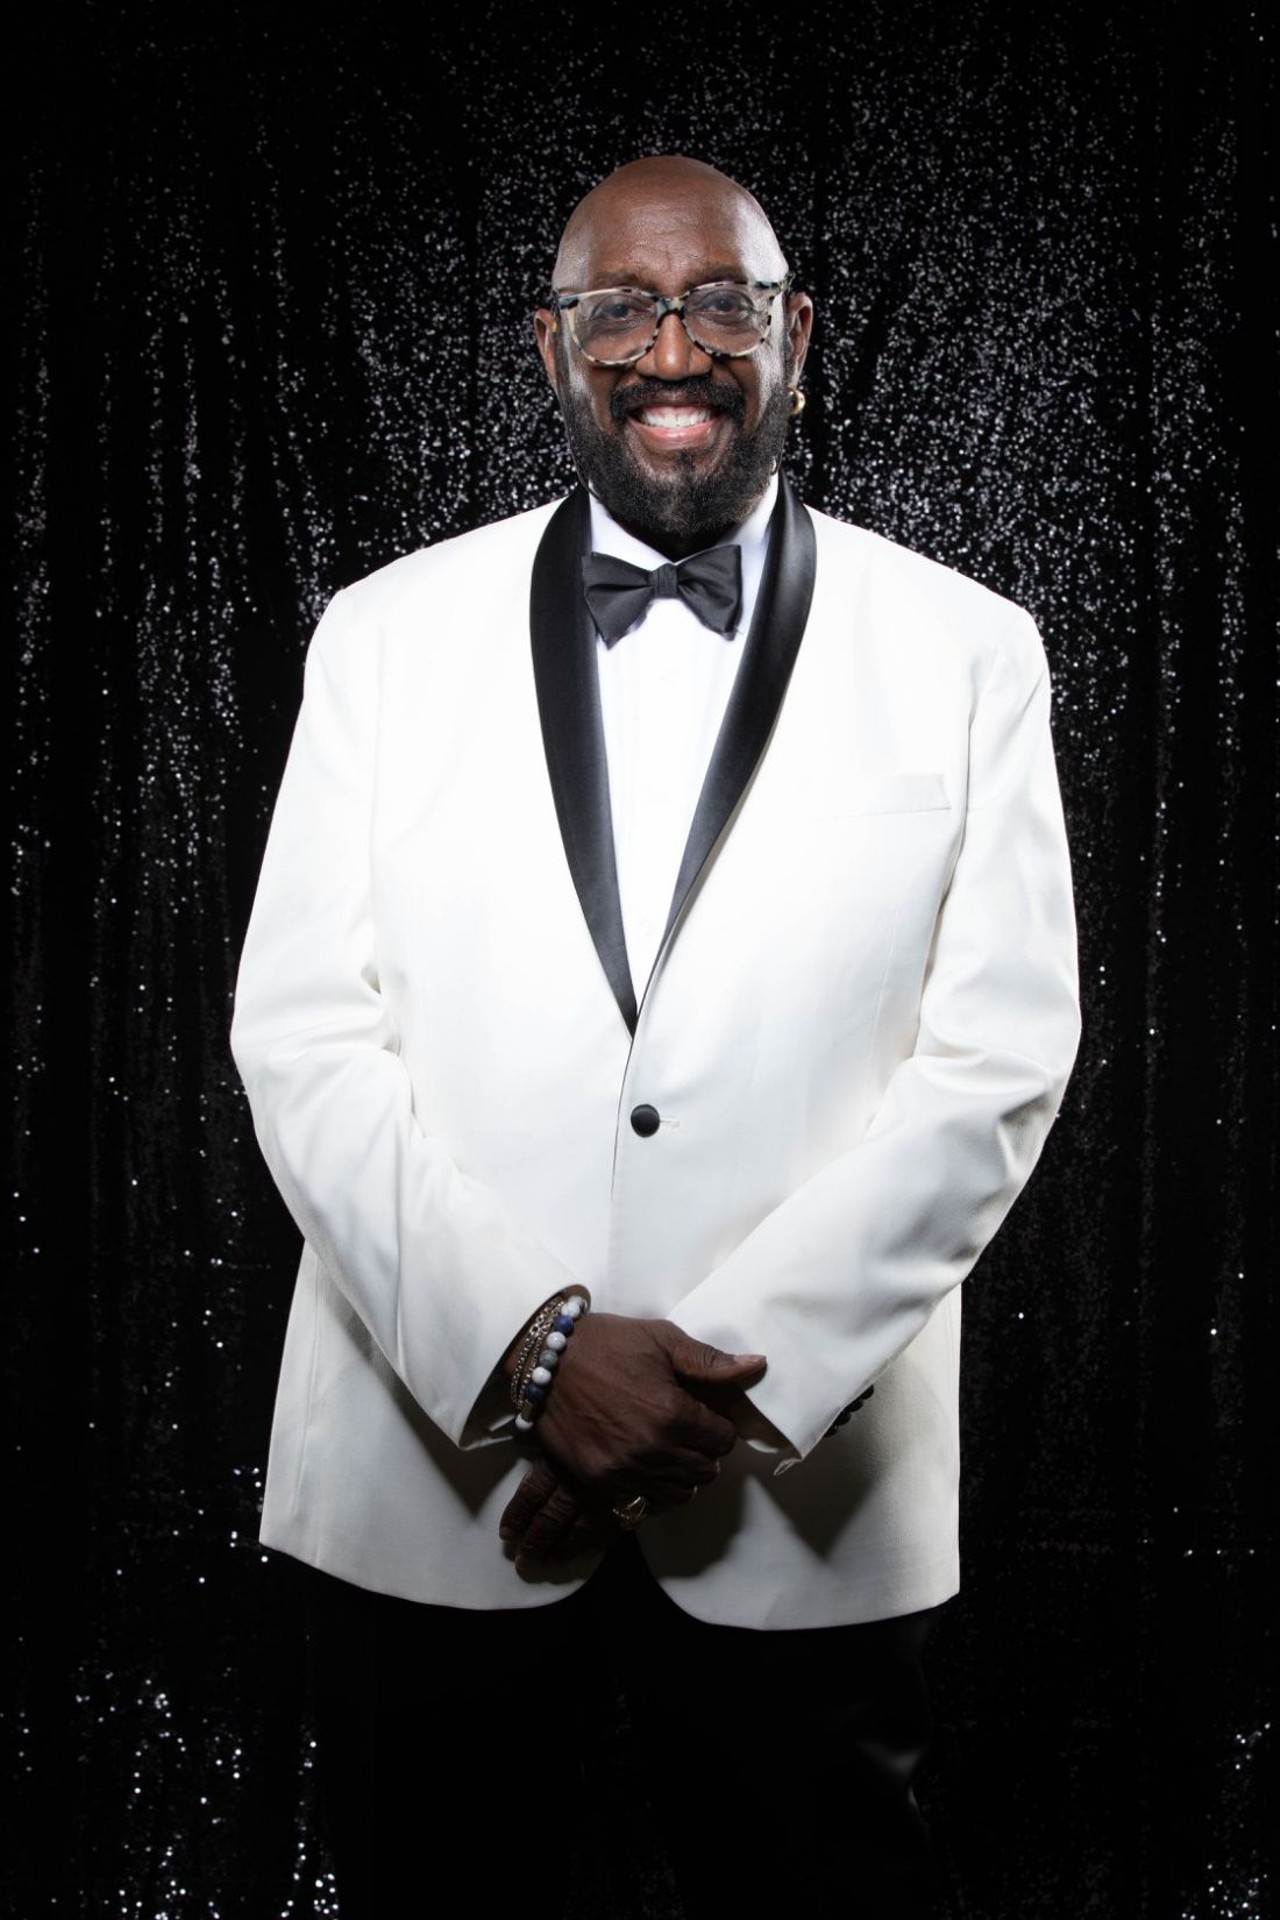 Otis Williams
Photo via Facebook
Otis Williams is the founding member of multi-Grammy Award-winning Motown vocal group The Temptations, listed at No. 68 in Rolling Stone magazine&#146;s list of the 100 Greatest Artists of All Time. Williams moved to Detroit at age 10, where he developed an interest in R&B and soul music. He was inducted into the Rock and Roll Hall of Fame in 1989.
cameo.com/otiswilliams